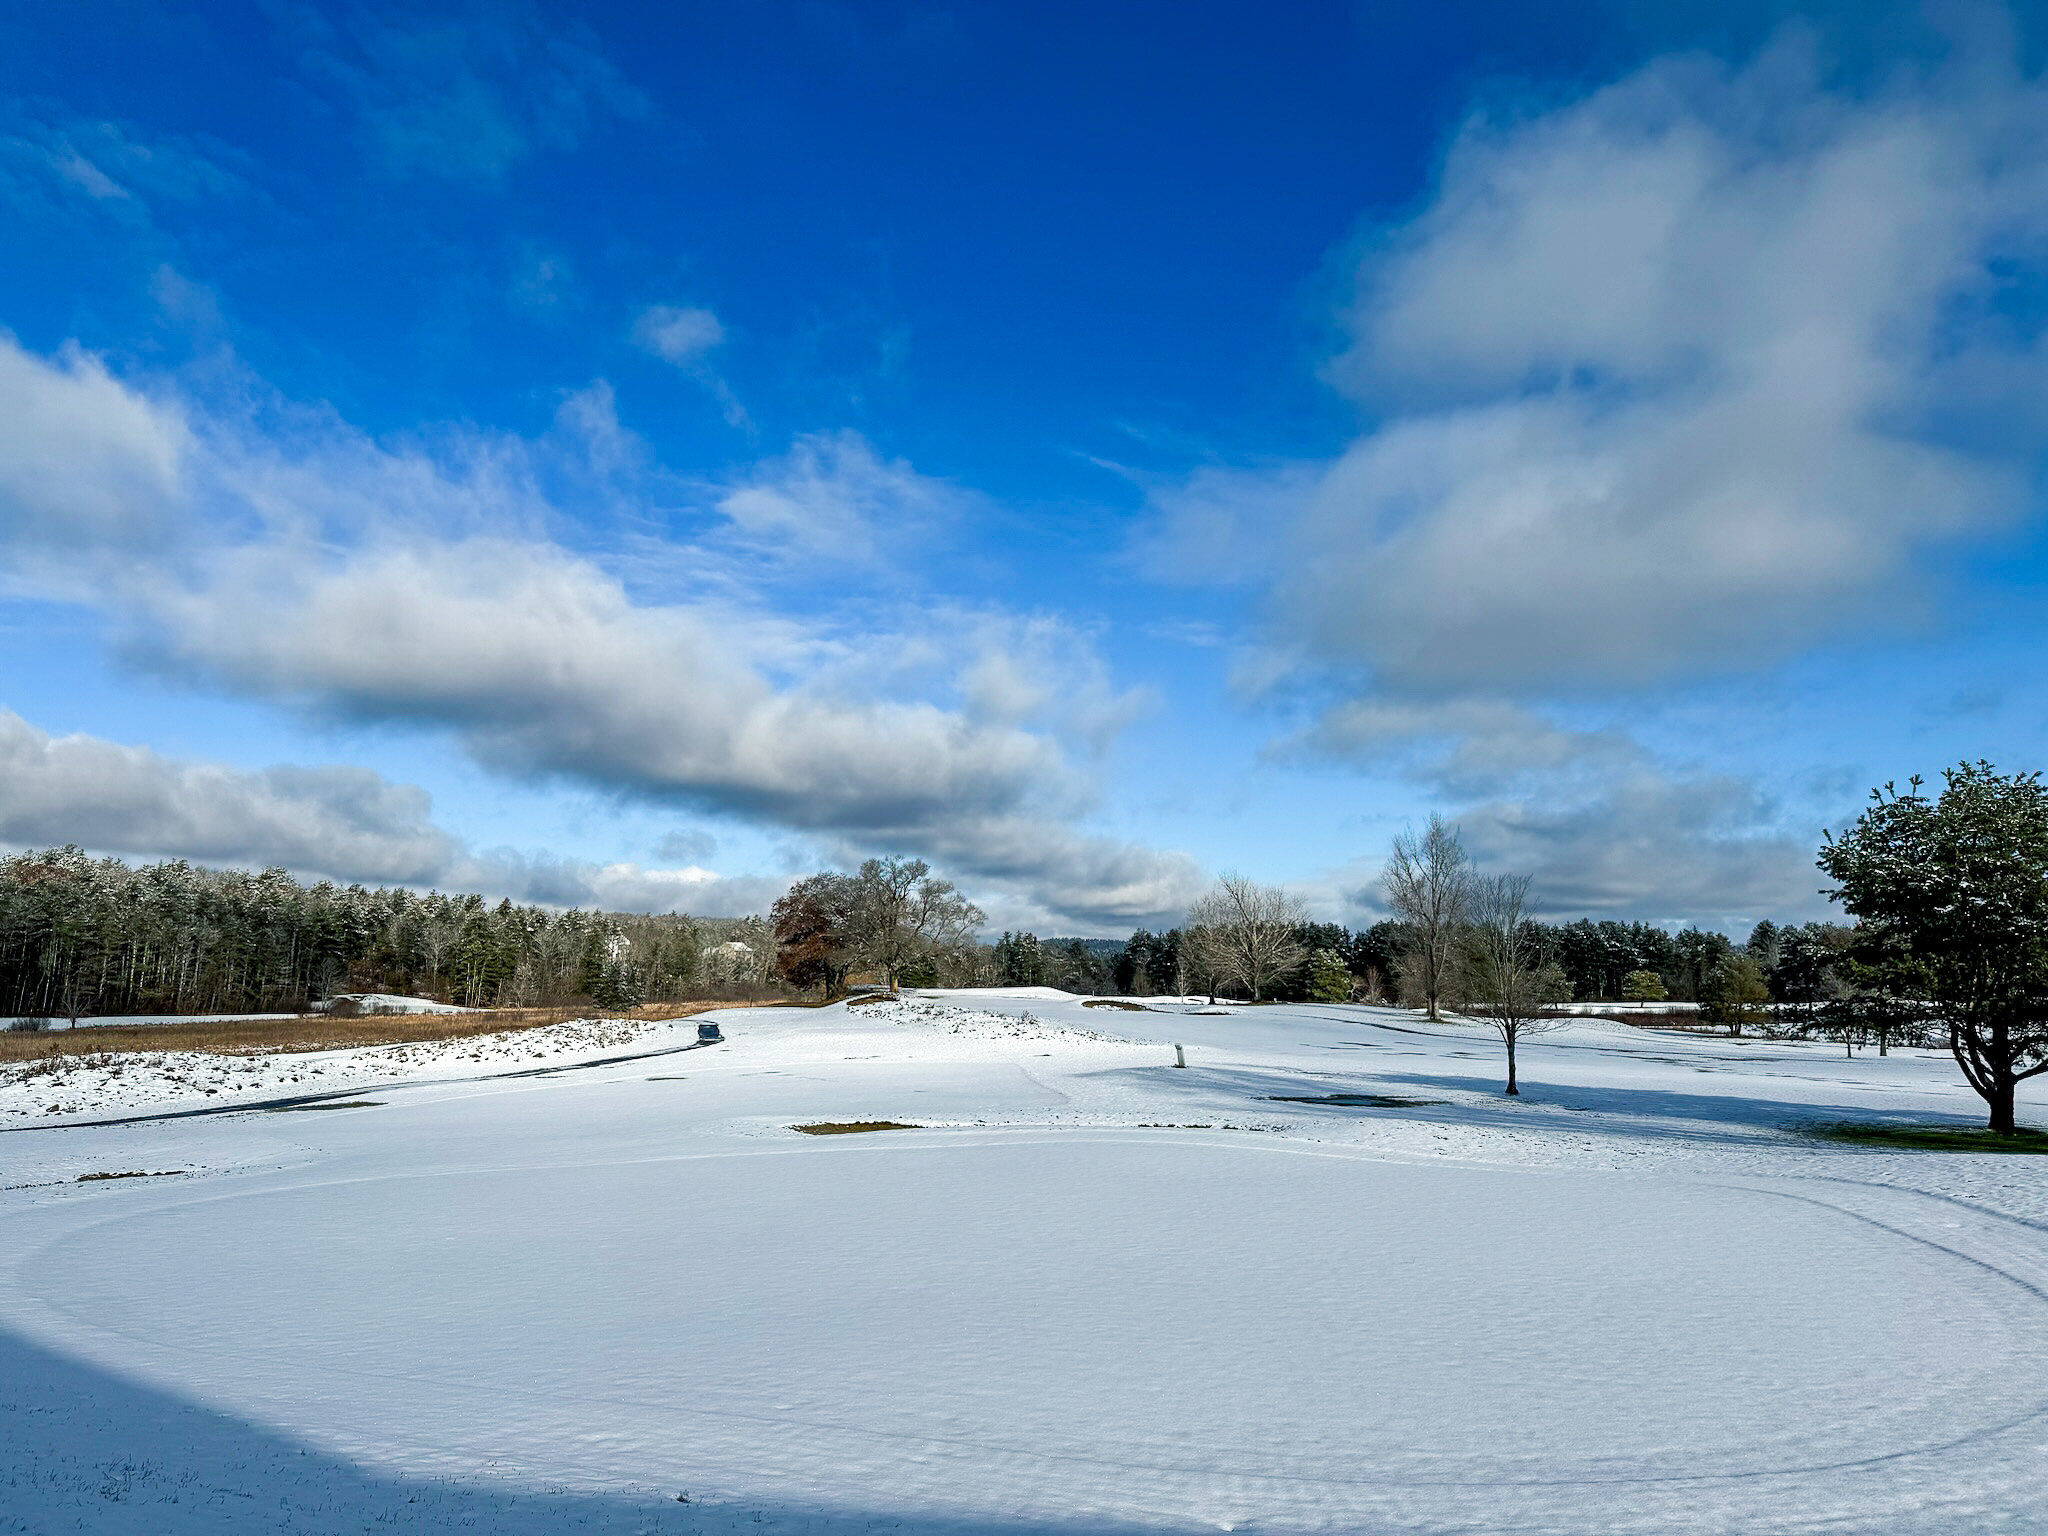 It's a beauty out there!  REMINDER: As the snow accumulates, you'll begin to see the groomed trails by our friends at Bath Parks &amp; Recreation Department.  PLEASE do your best to stay on or near those trails and please stay off the greens. Even wi